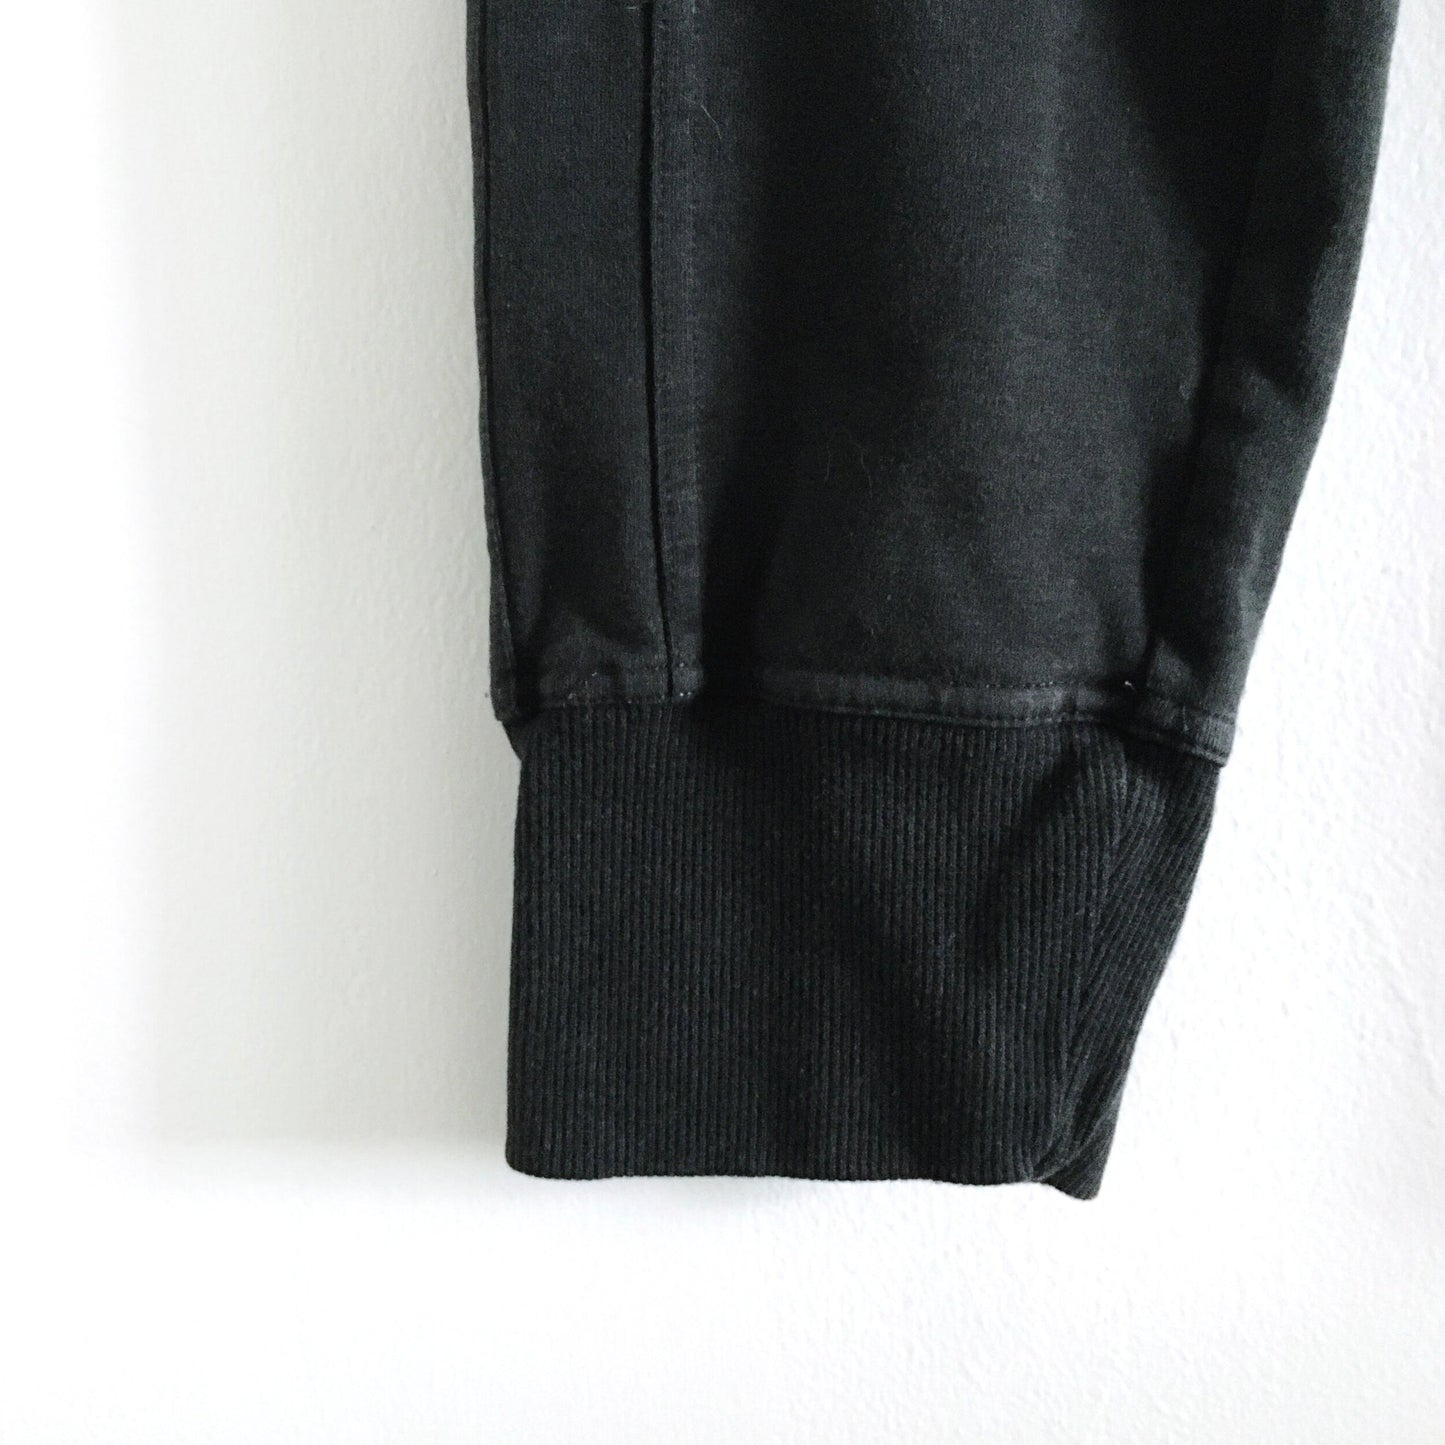 Lolë tapered joggers with ruched pocket - size Medium